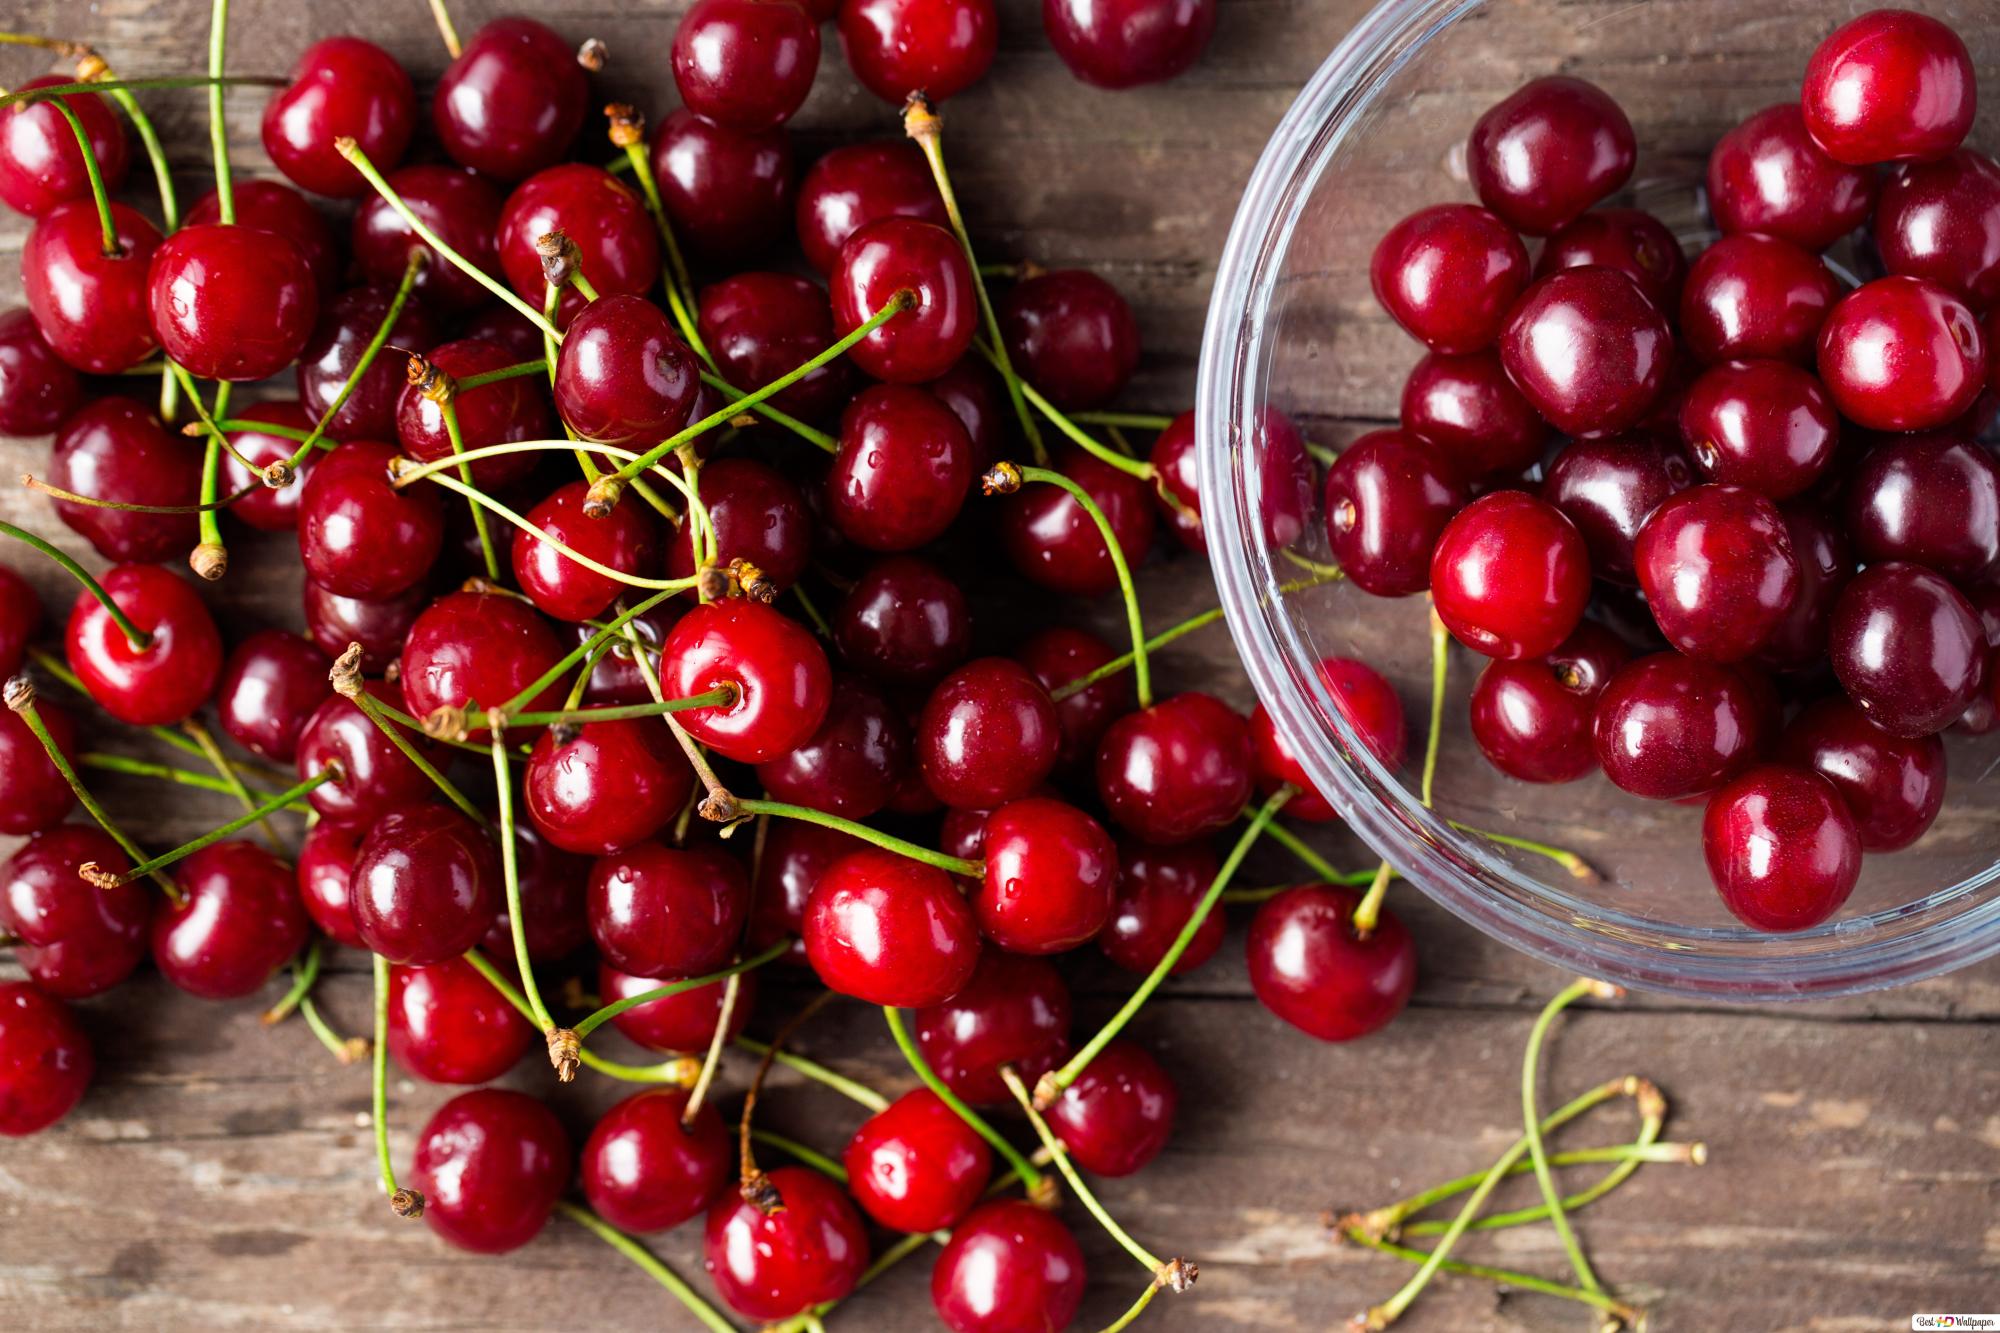 Specifications of Red cherry